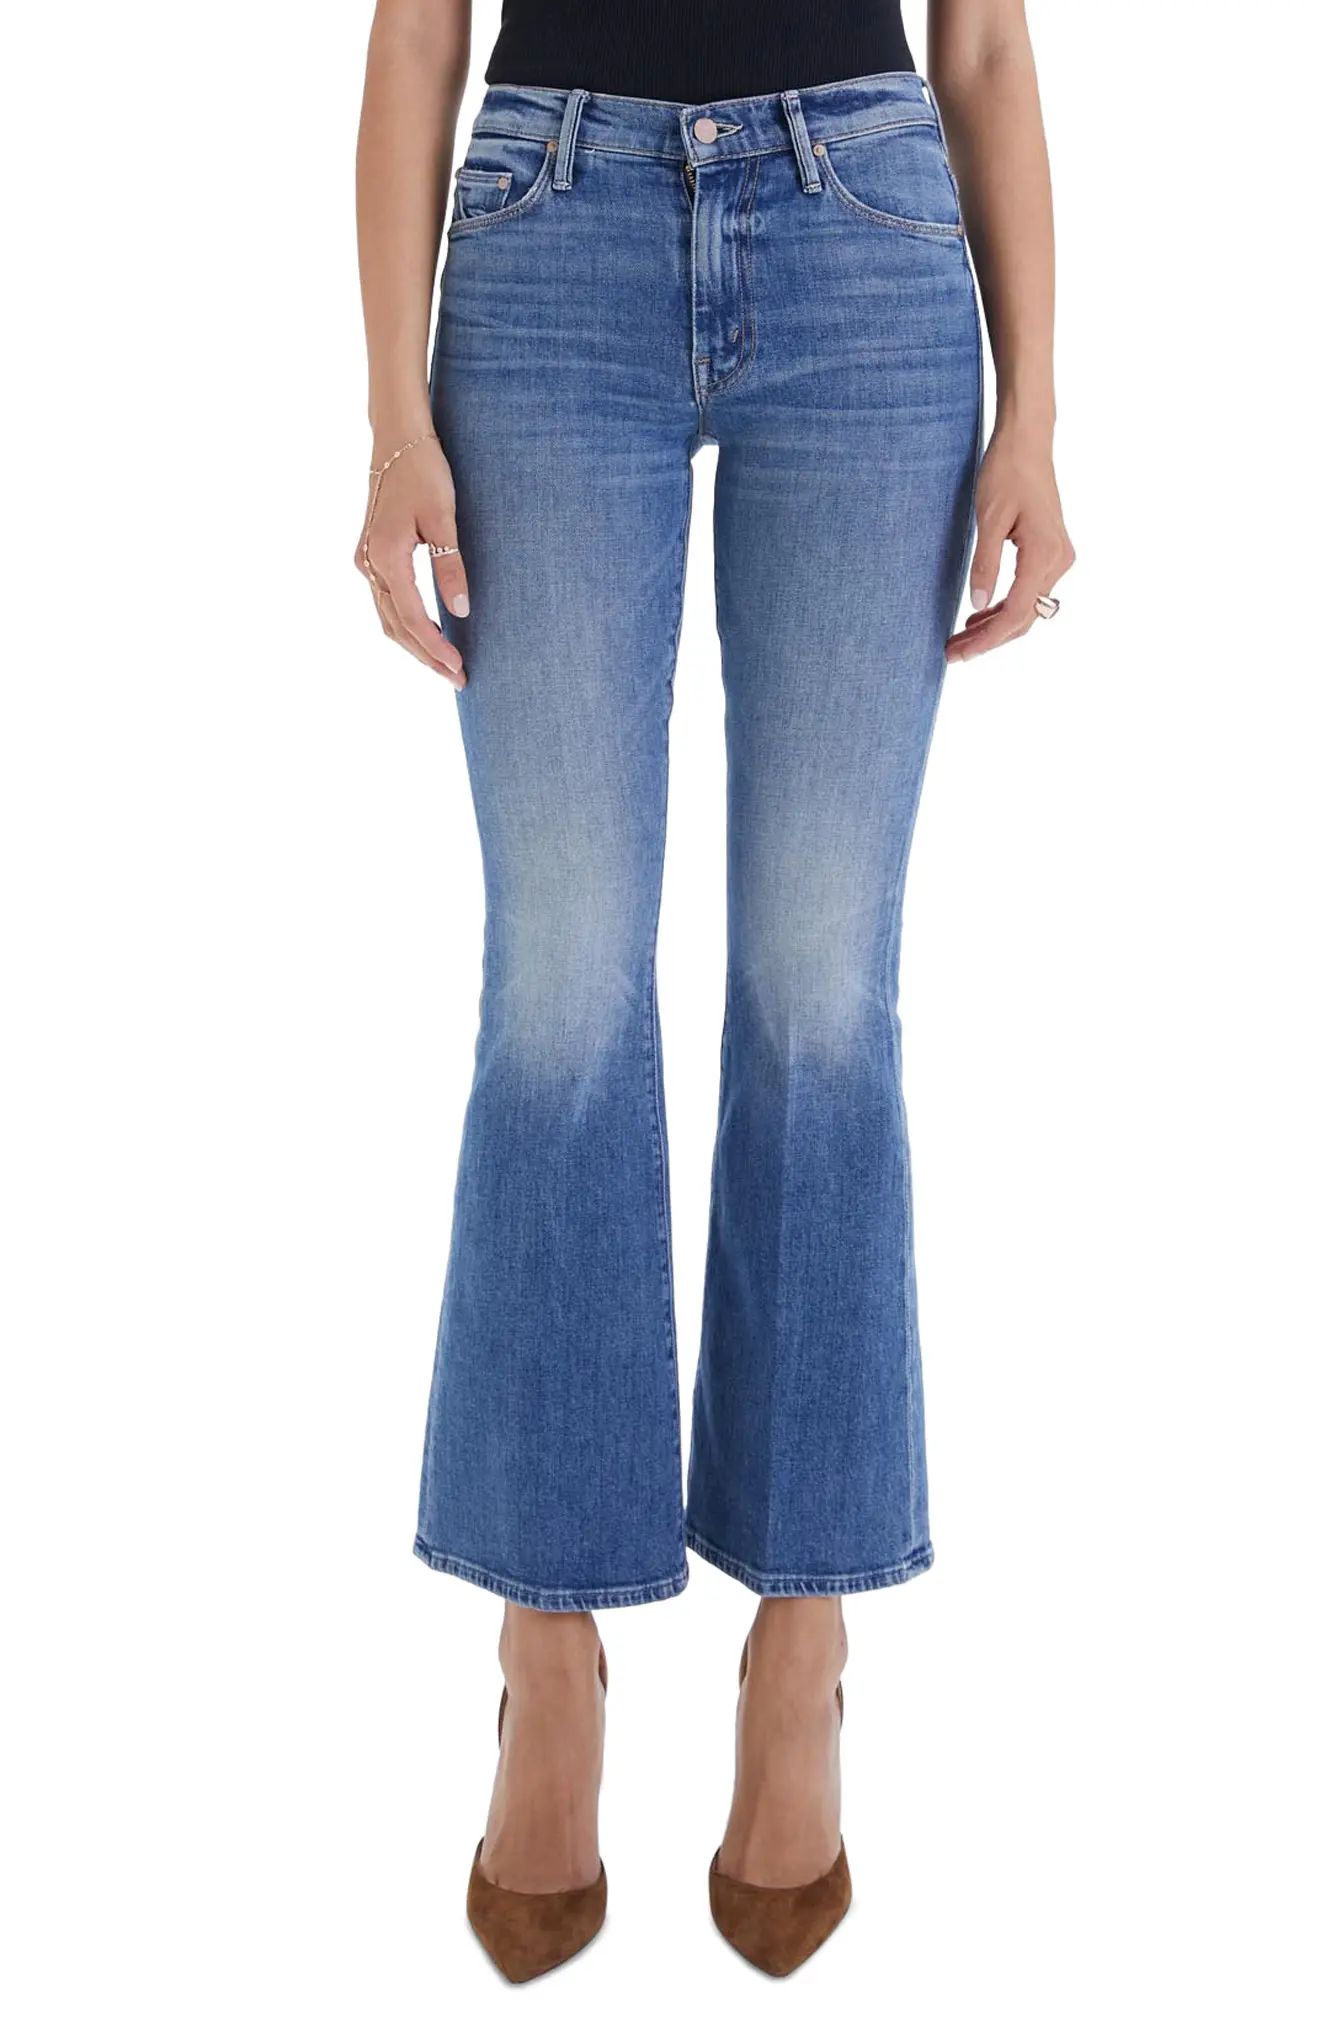 MOTHER Flare Leg Jeans in Love Bombs at Nordstrom, Size 25 | Nordstrom